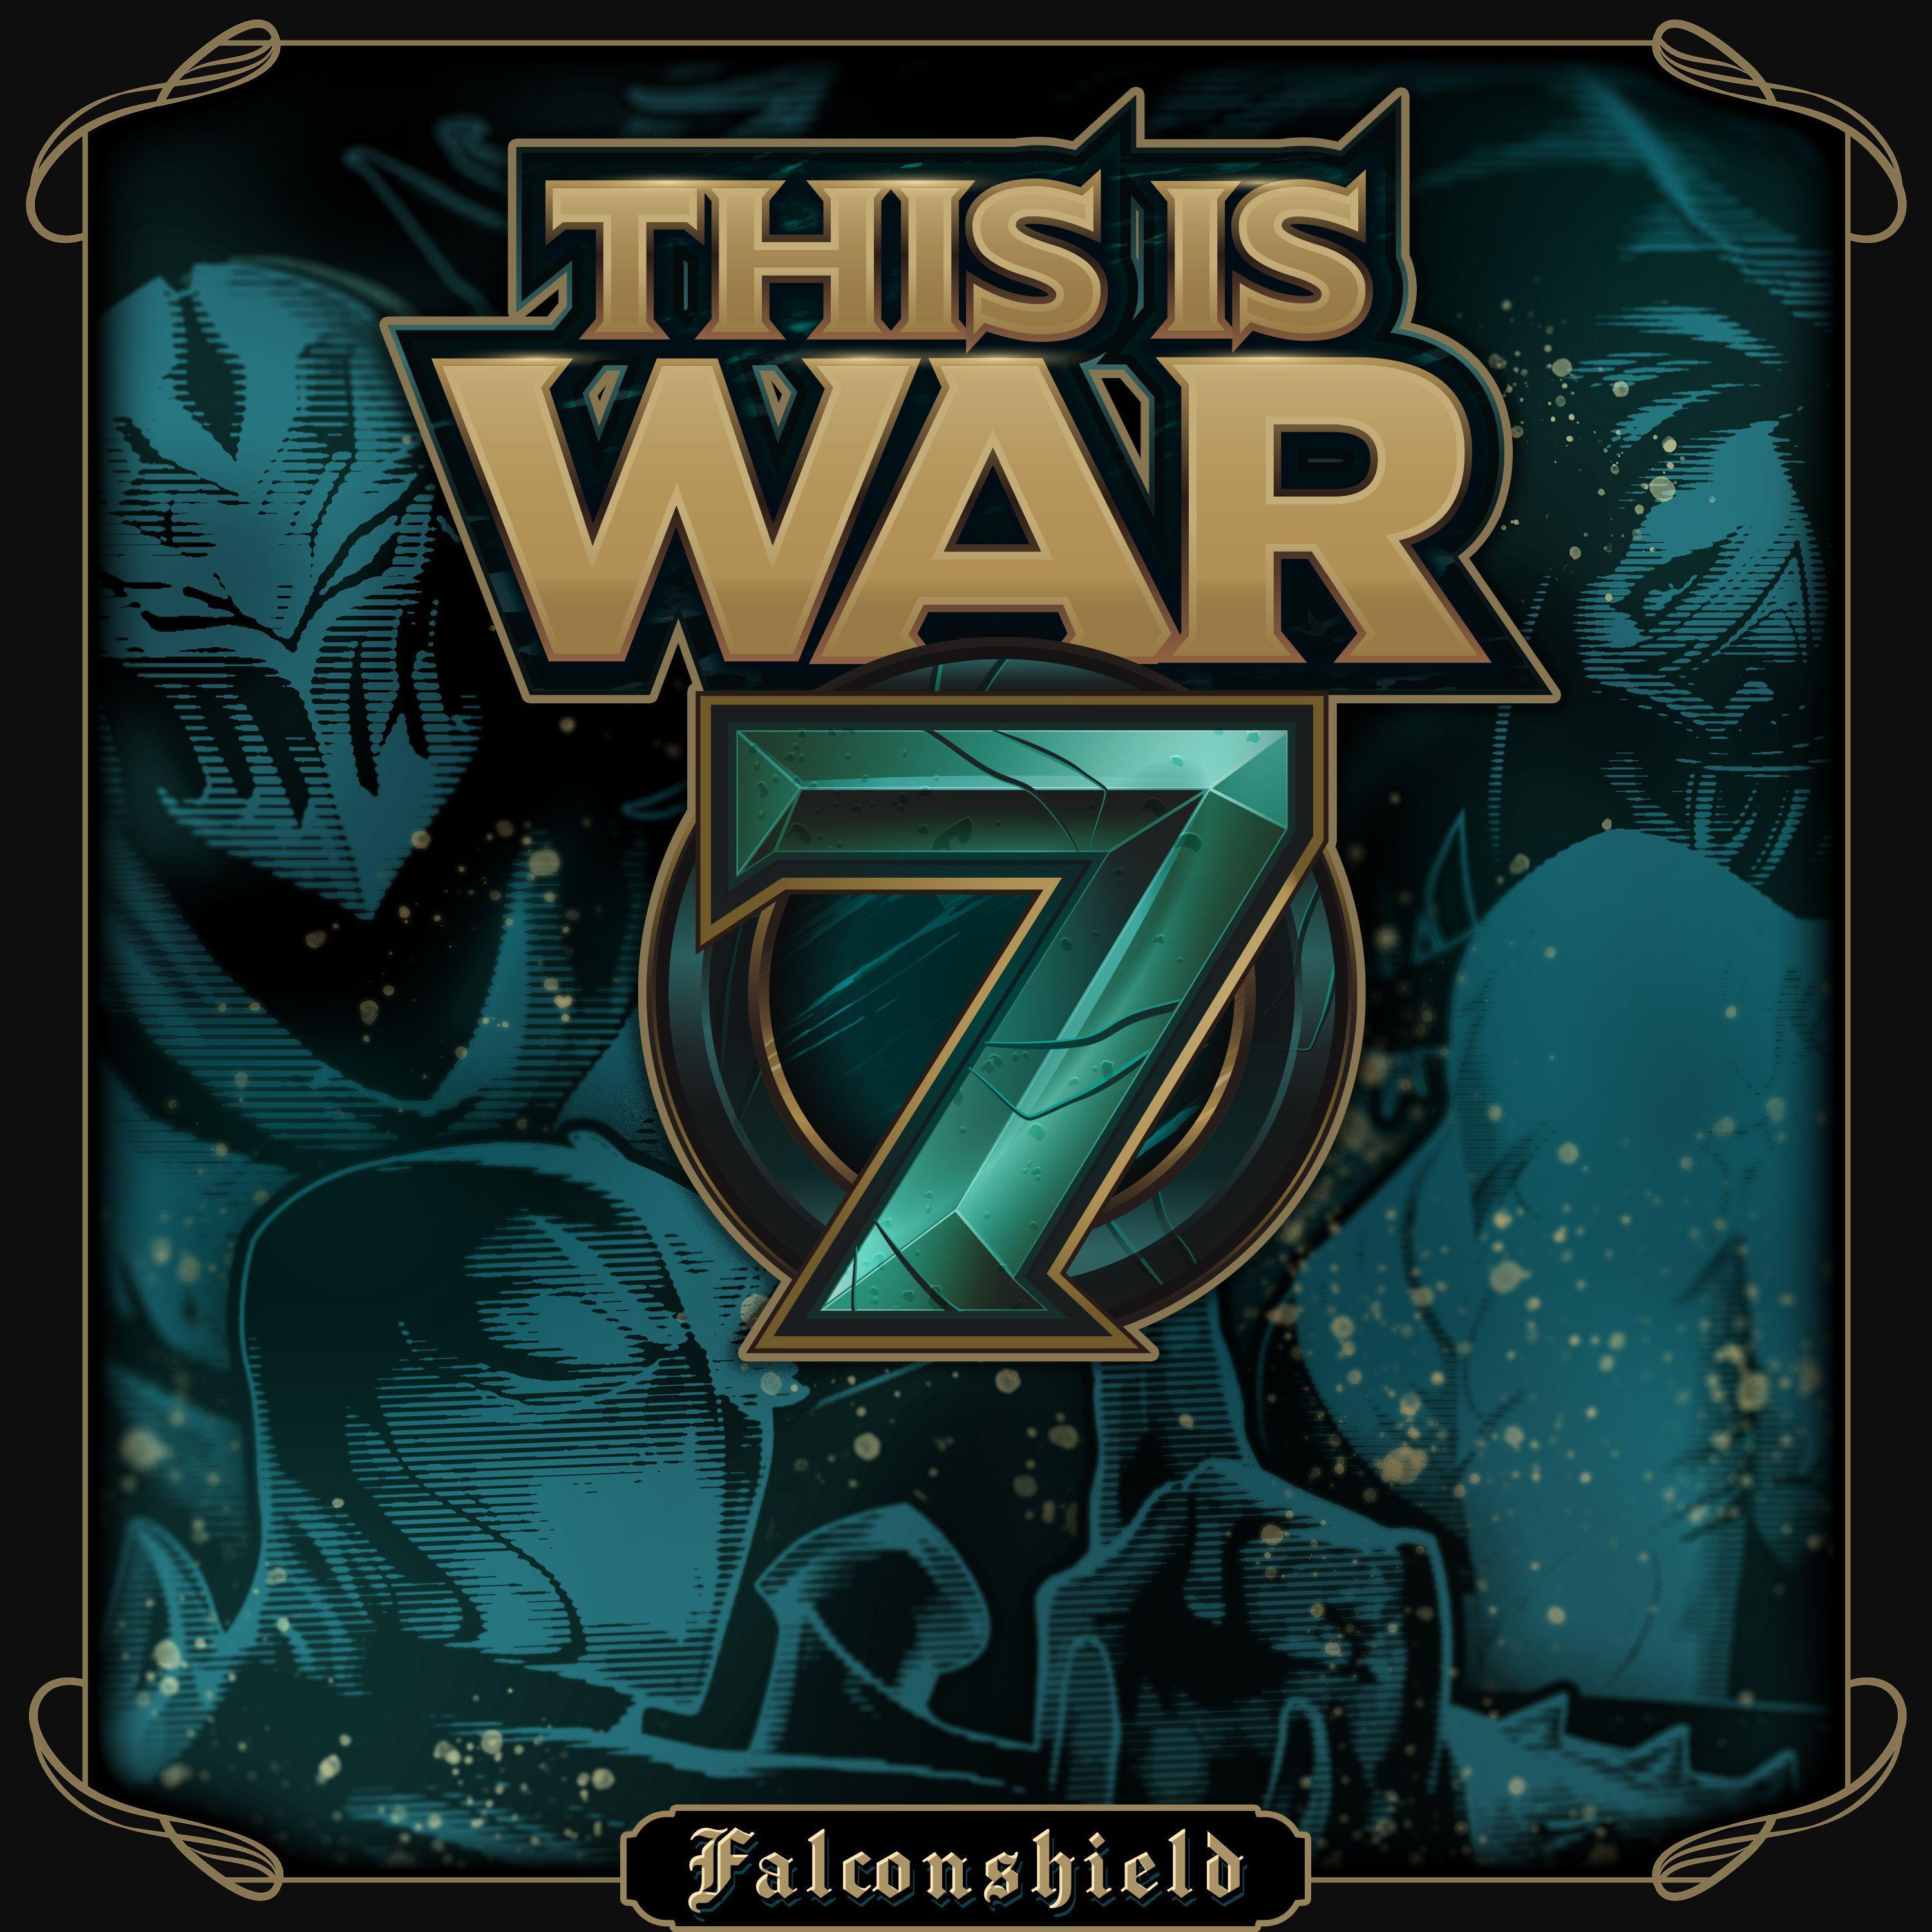 falconshield - This Is War 7